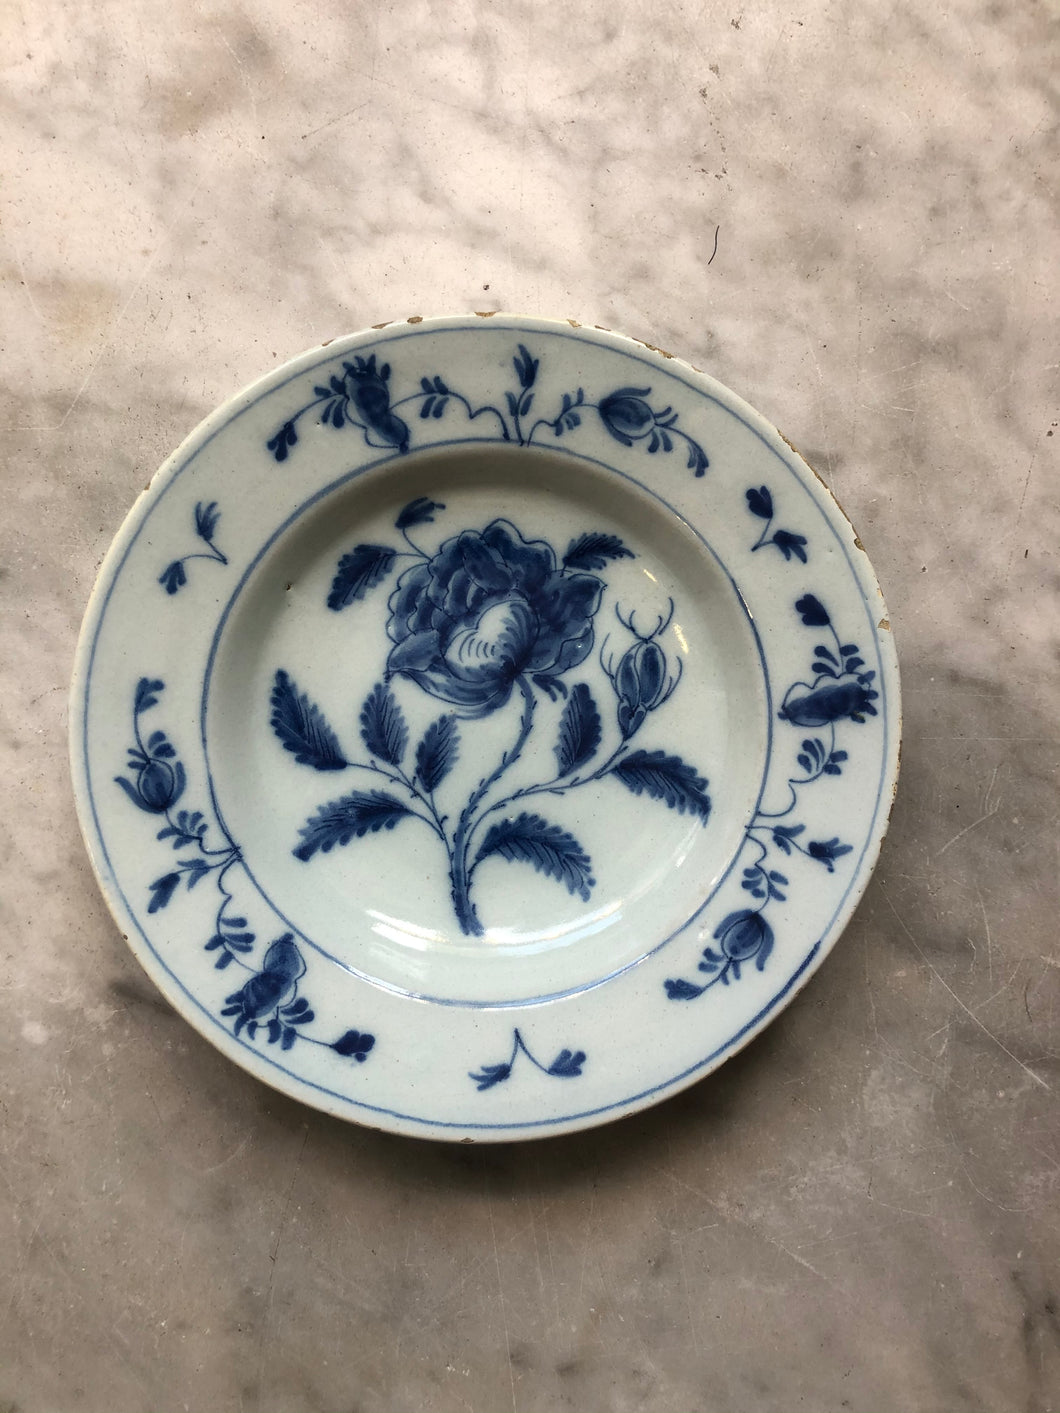 Nice handpainted dutch delft plate with tulip